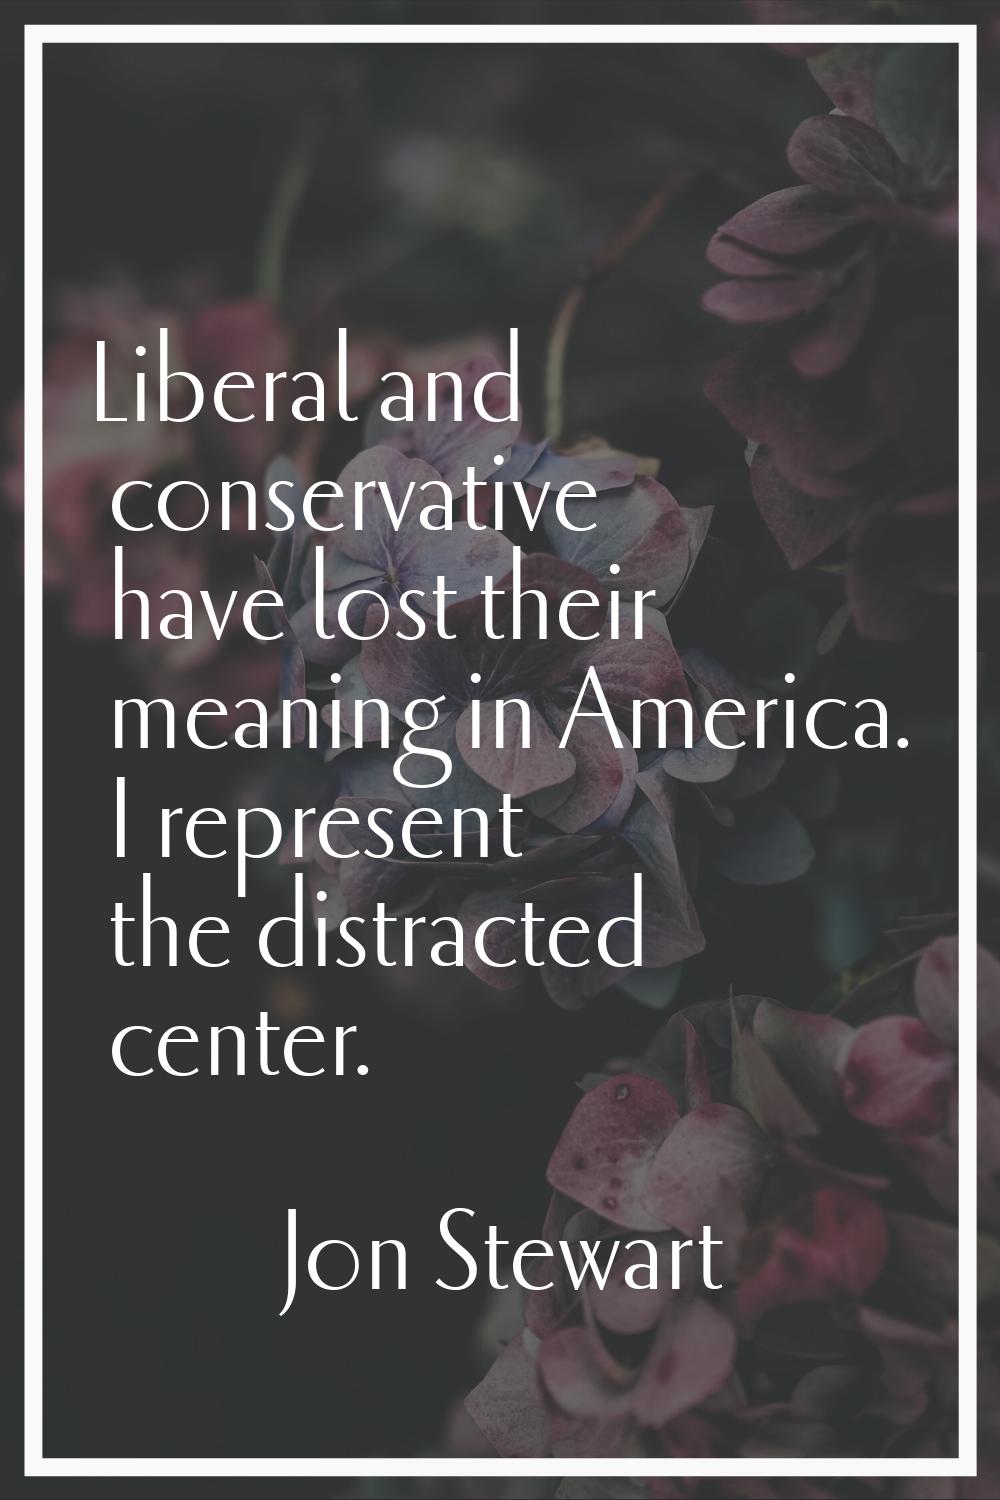 Liberal and conservative have lost their meaning in America. I represent the distracted center.